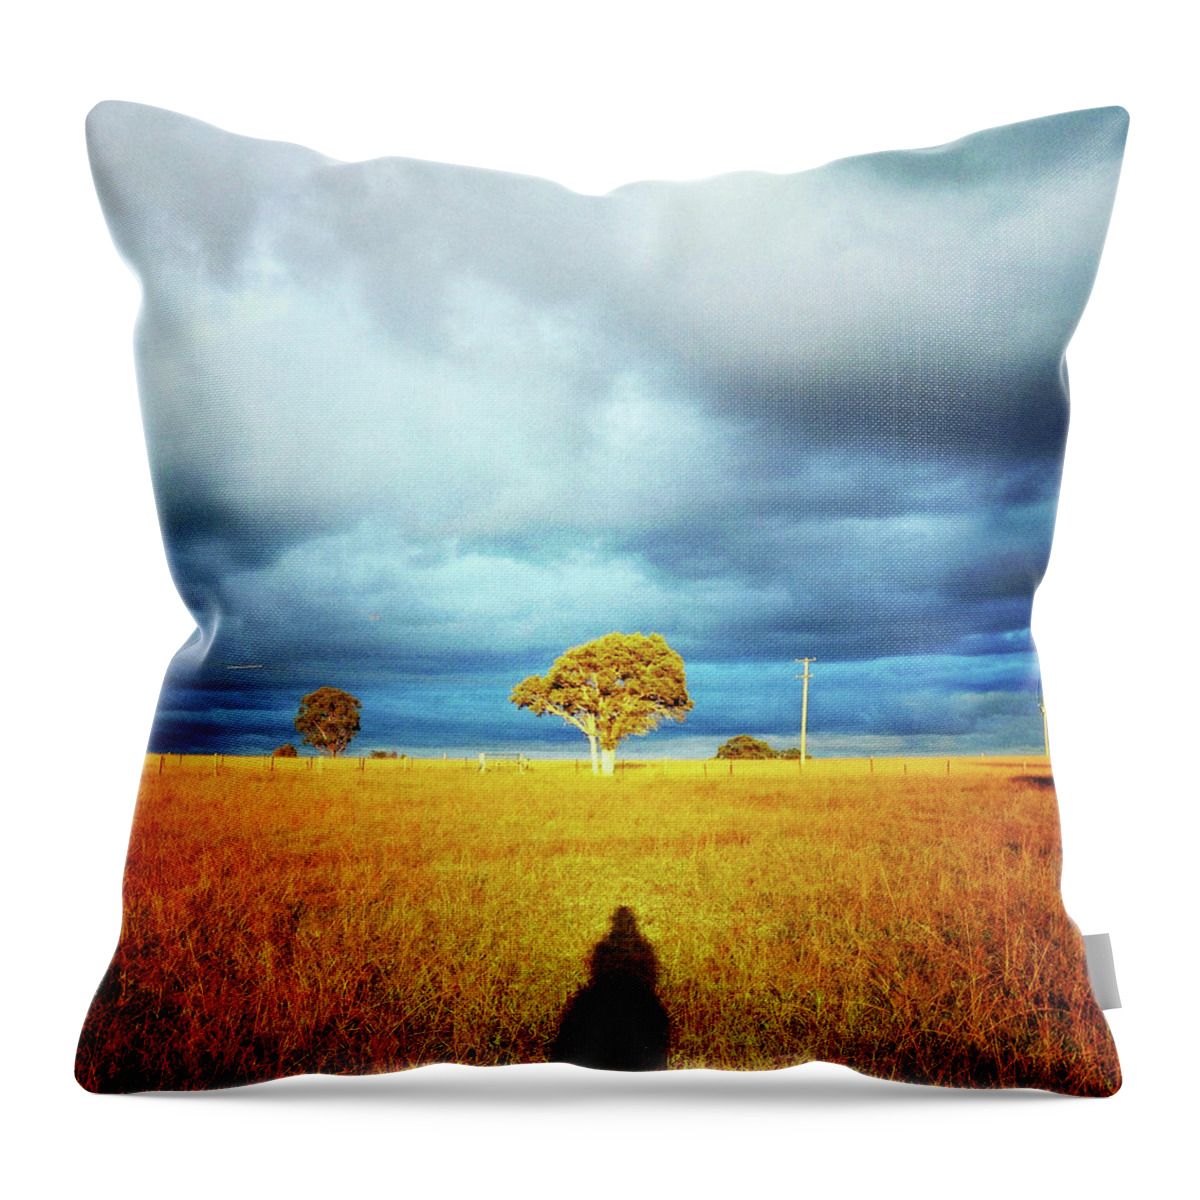 Tranquility Throw Pillow featuring the photograph Sun Shines On The Golden Grass In by Photography By Bobi